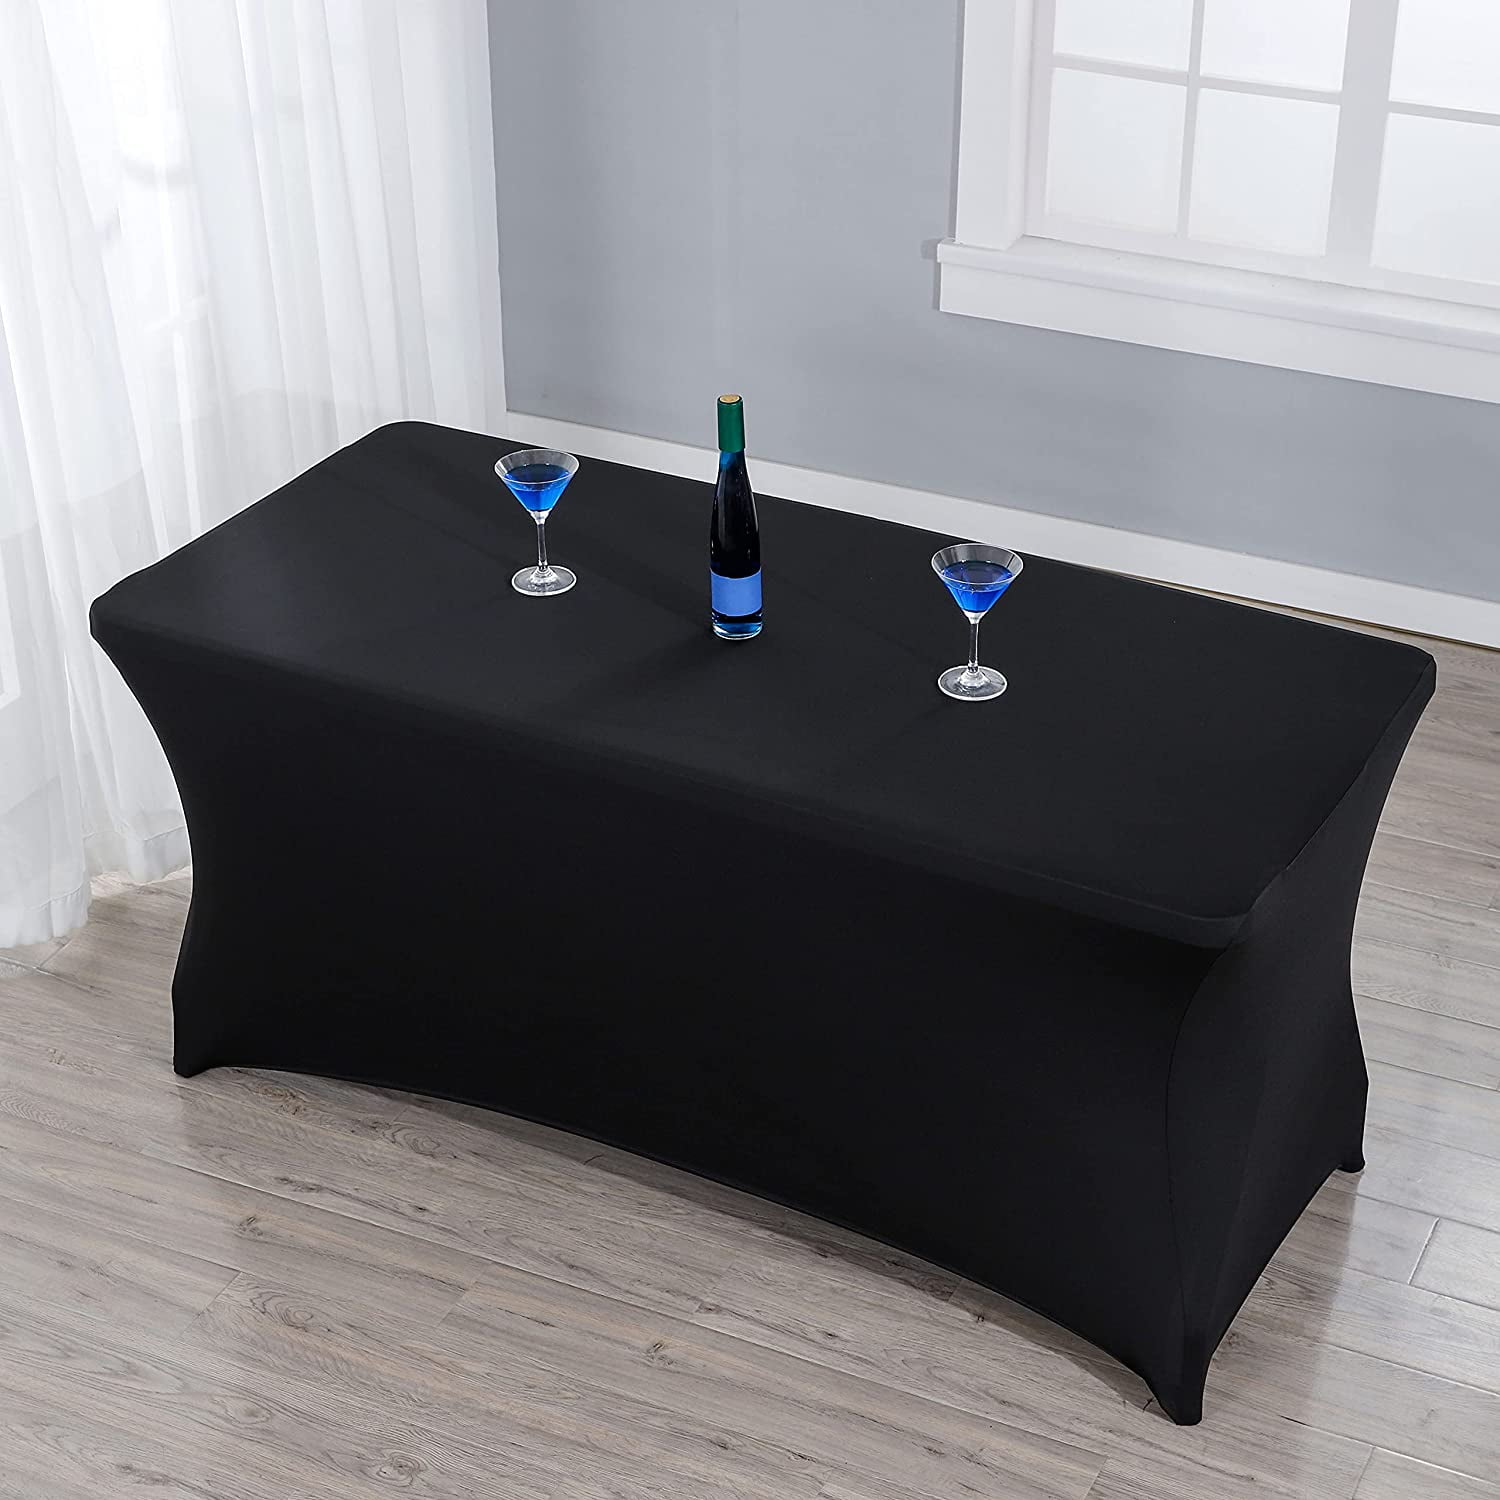 182L X 76W X 76H CM , Black Wedding Table Massage Table Cocktail Table Kitchen Table 6 ft Rectangular Black Cocktail Tablecloth with Stretch Spandex Fitted Table Cover for bar Table 72L X 30W X 30H